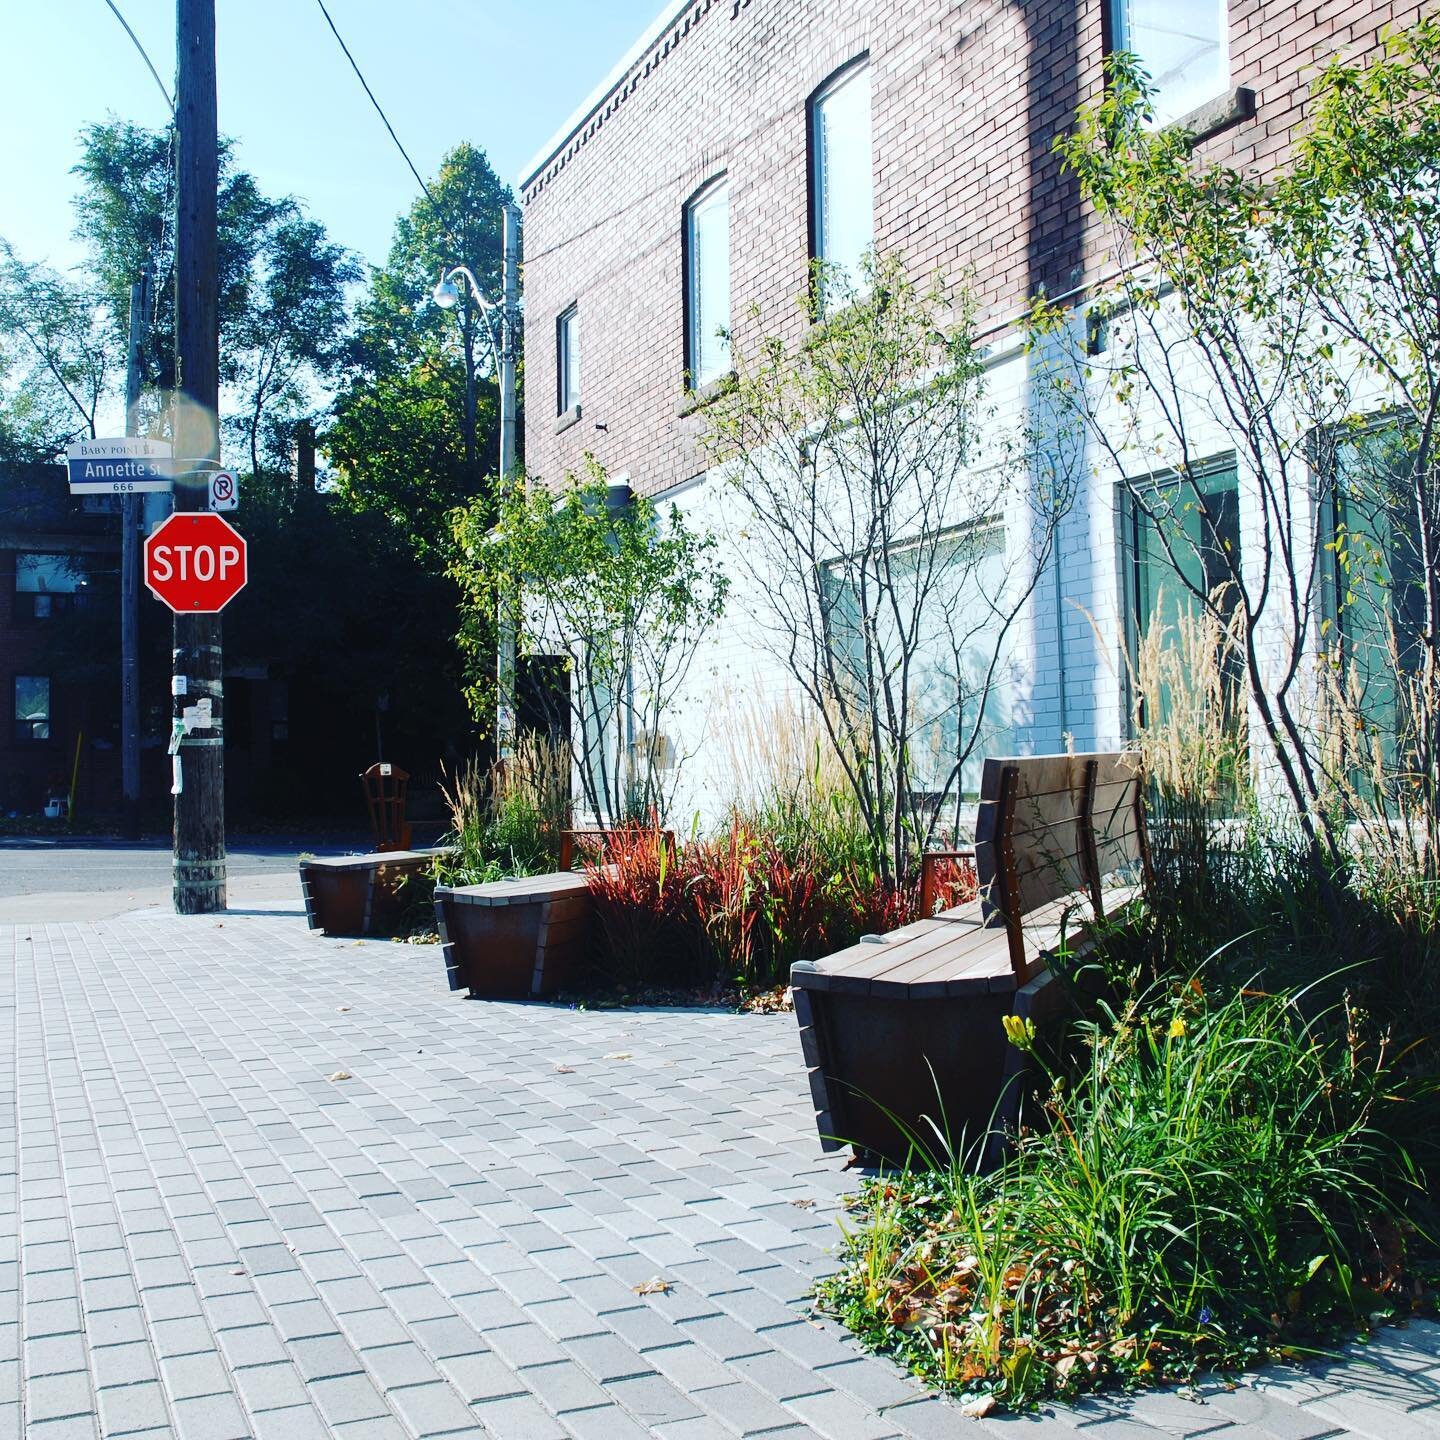 Delighted to see The Terrace @ Windemere and Annette won 2nd prize at the City of Toronto Garden Contest last night. We are honoured to have been involved, as always with @babypointgates for this parkette. @babypoint_hardware @torontopfr #community